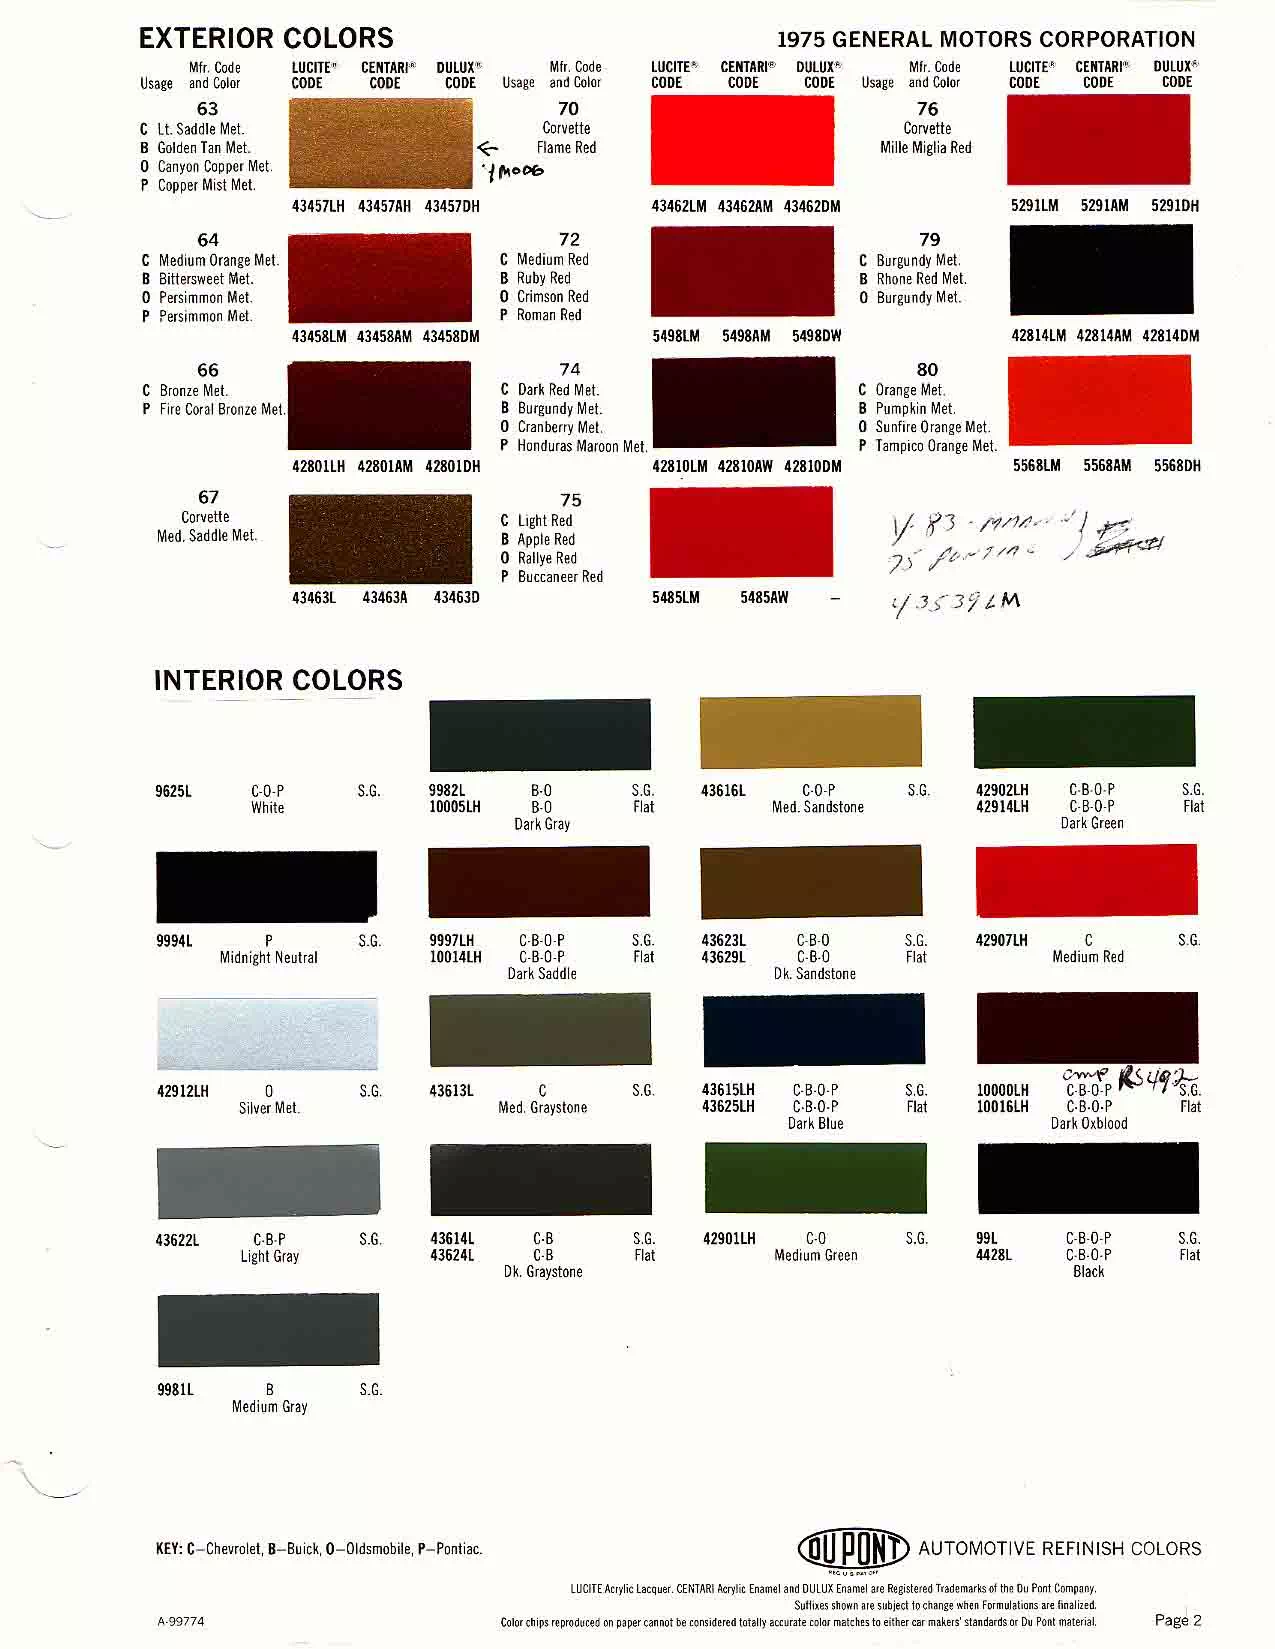 Colors, Descriptions, Codes, and Paint Swatches for General Motors Vehicles in 1975